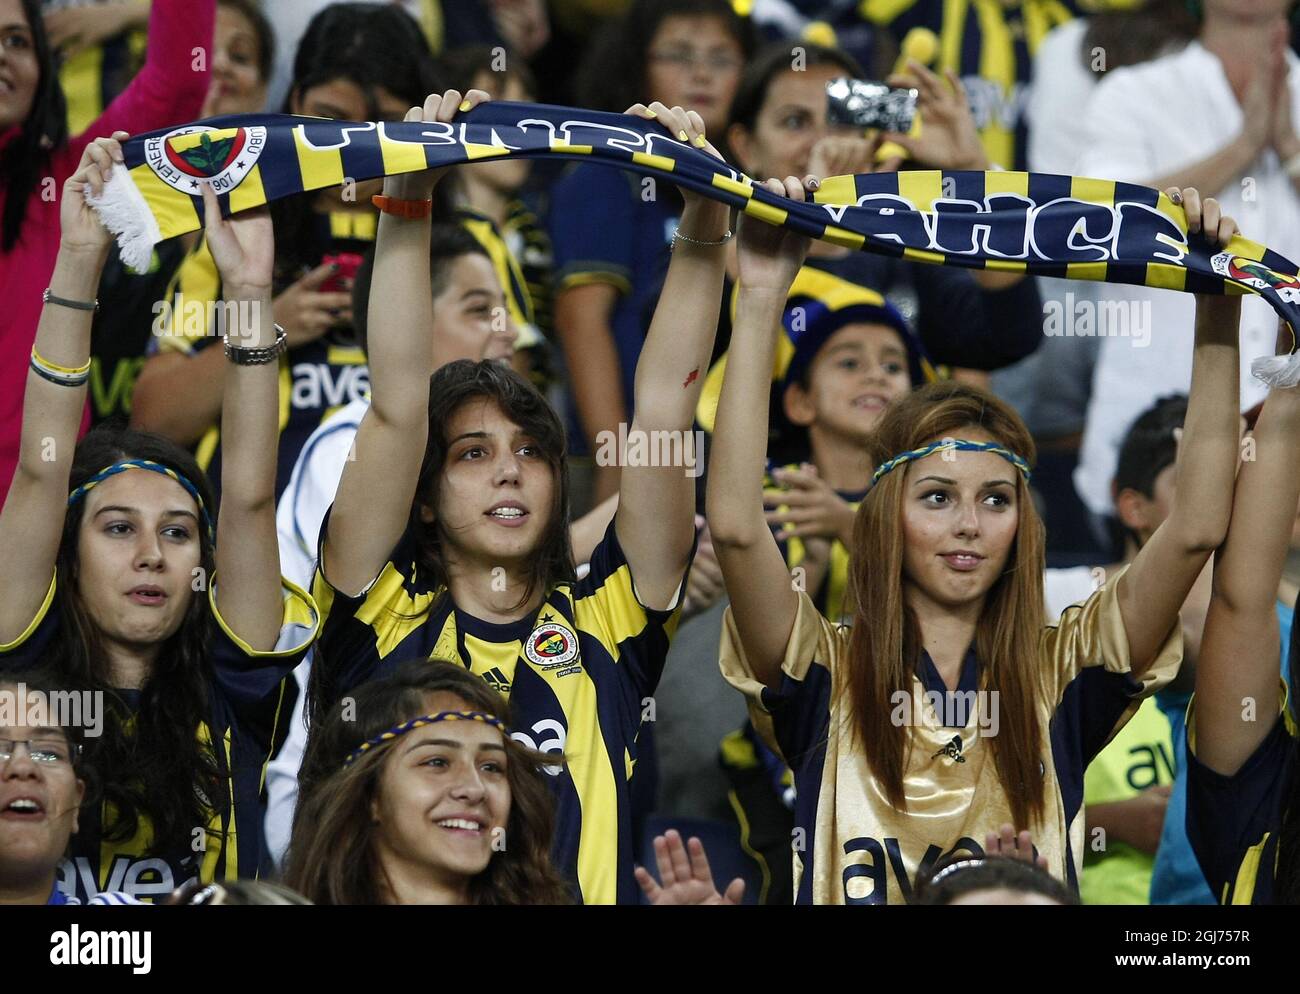 ISTANBUL 2011-09-20 More than 41,000 women and children filled Sukru Saracoglu Stadium to watch Fenerbahce play against Manisapor in Turkish League soccer match in Istanbul, Turkey, Tuesday, Sept. 20. 2011. Turkey came up with a radical solution for tackling crowd violence at football matches ban the men and let only women and children in. Under new rules approved by Turkey's football association, only women and children under the age of 12 will be admitted to watch games for free involving teams which have been sanctioned for unruly behavior by their fans. Fenerbahce was ordered to play two h Stock Photo